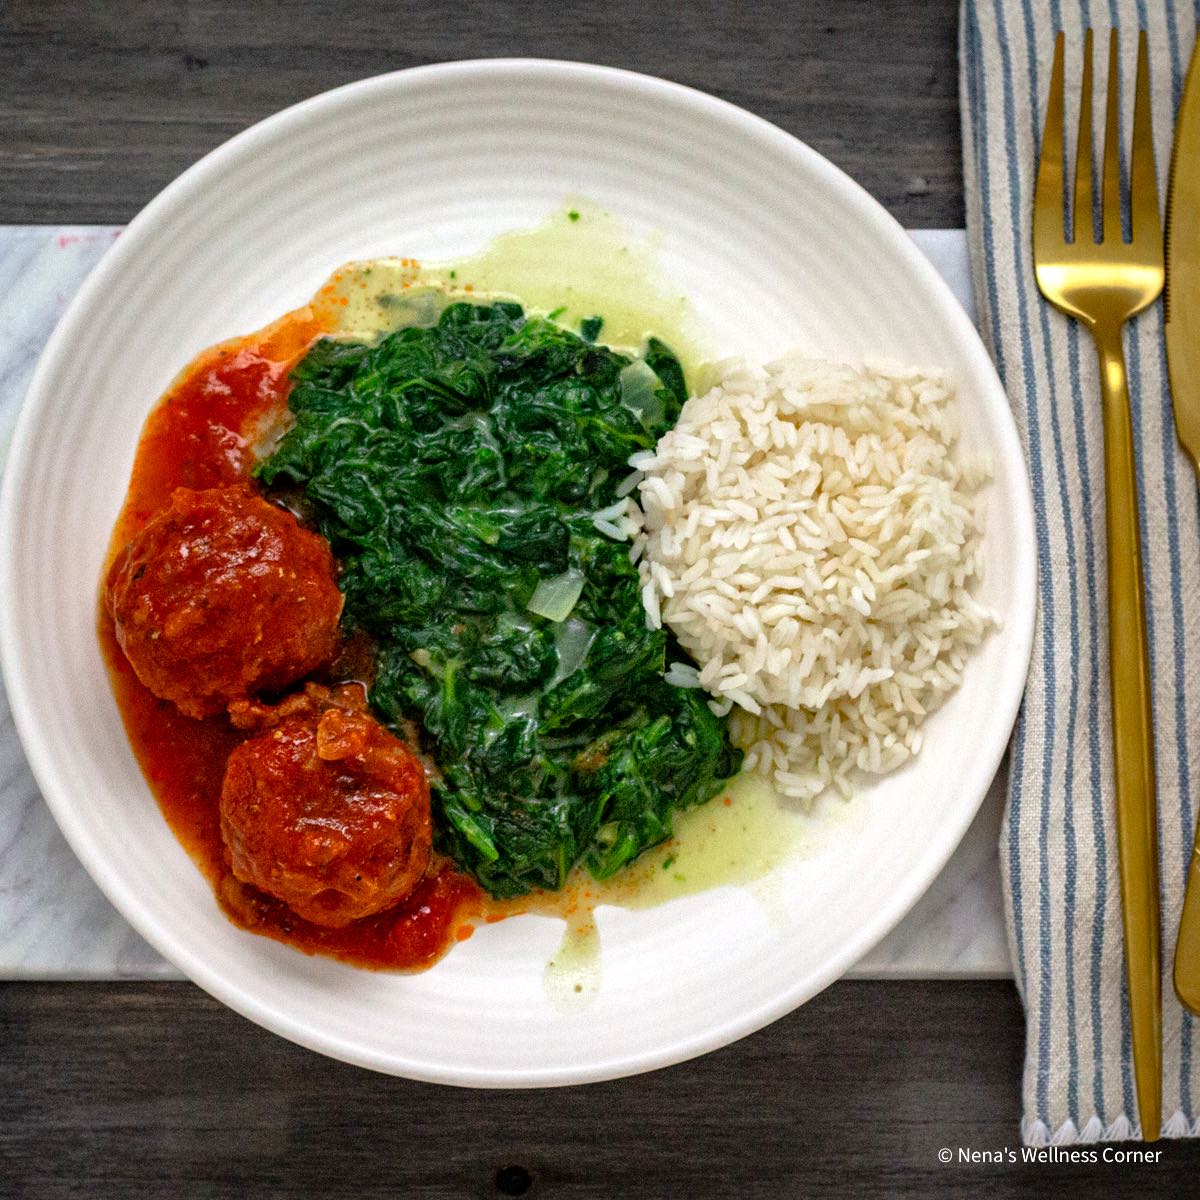 Turkey-meatballs-with-spinach-and-rice.